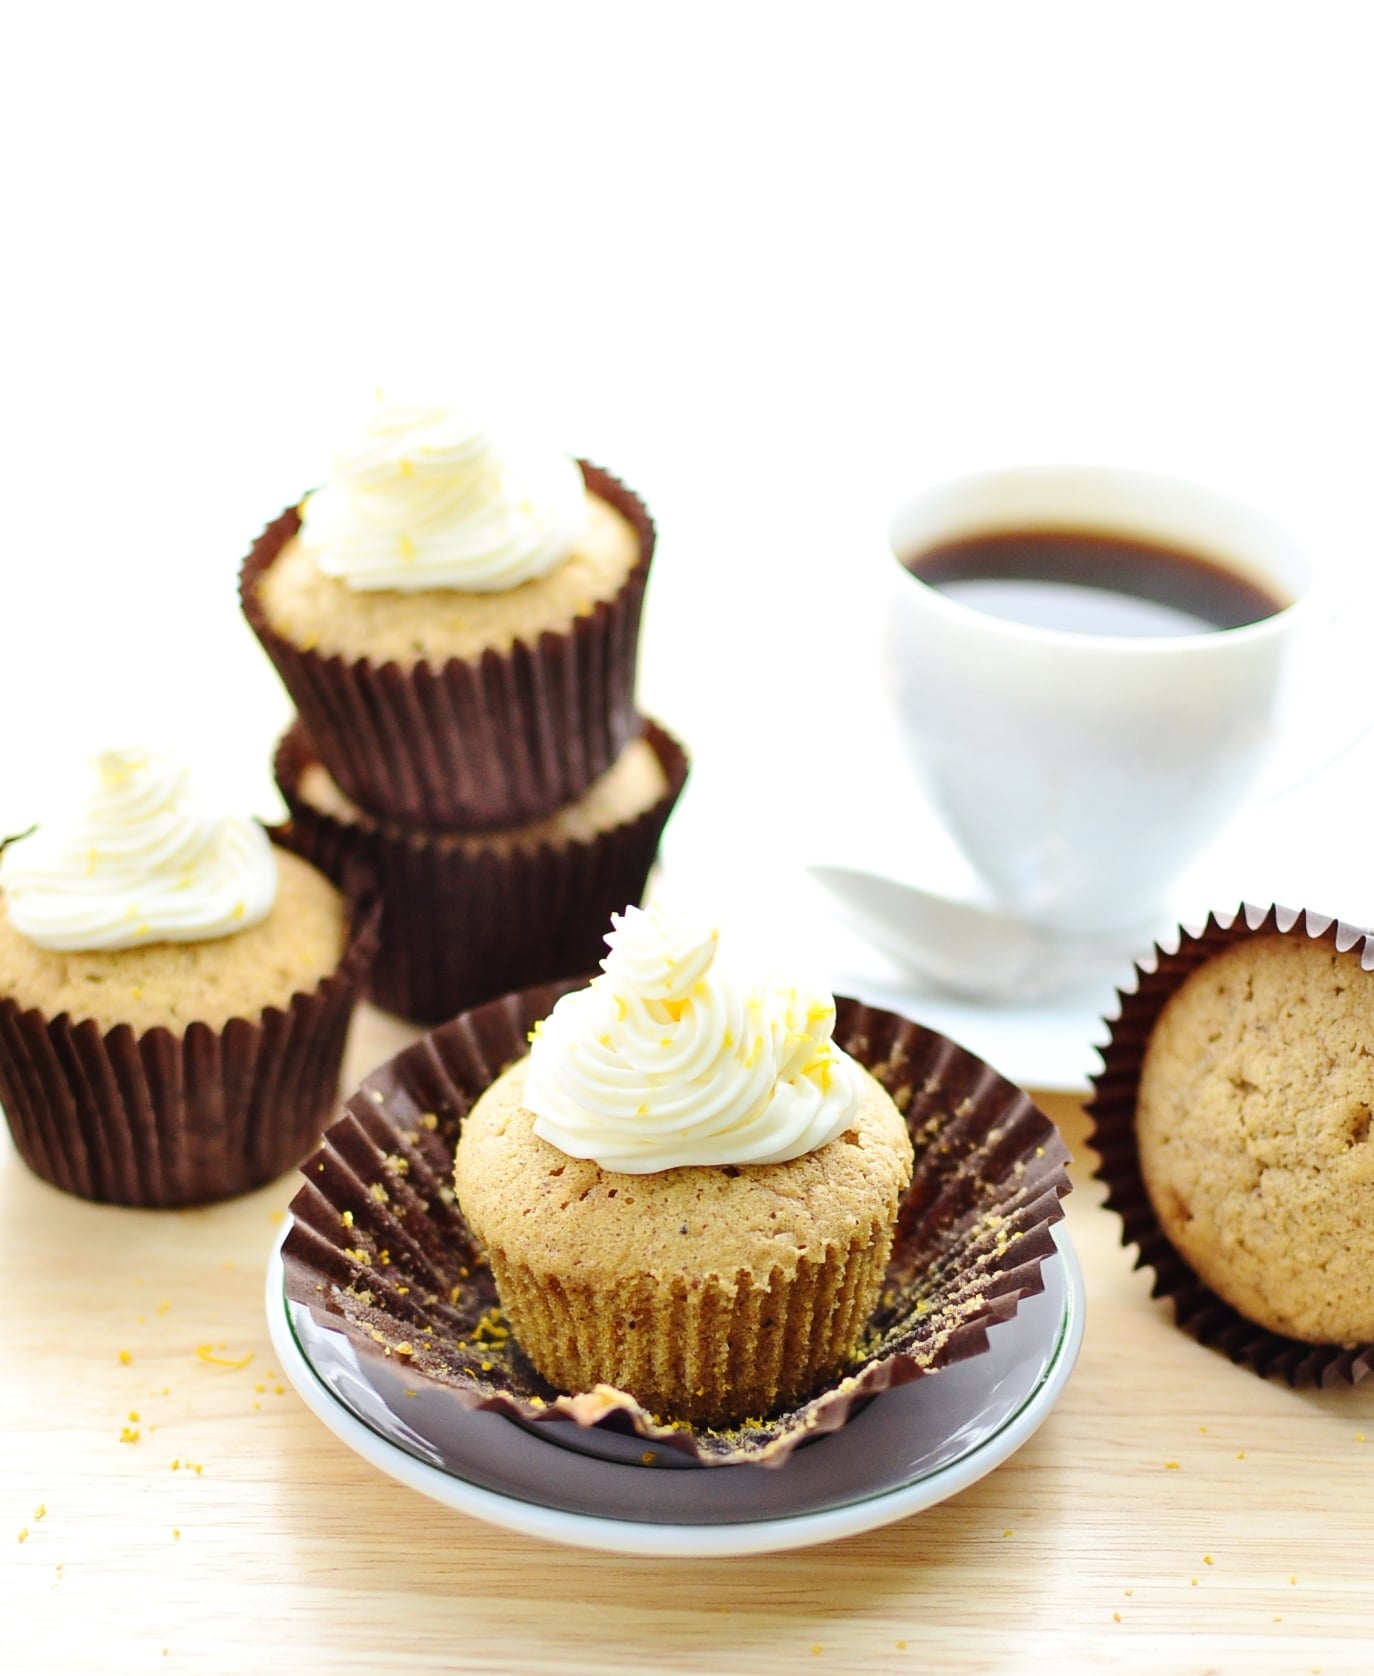 Cupcakes with white frosting in brown paper cases with saucer and white cup with coffee in background.